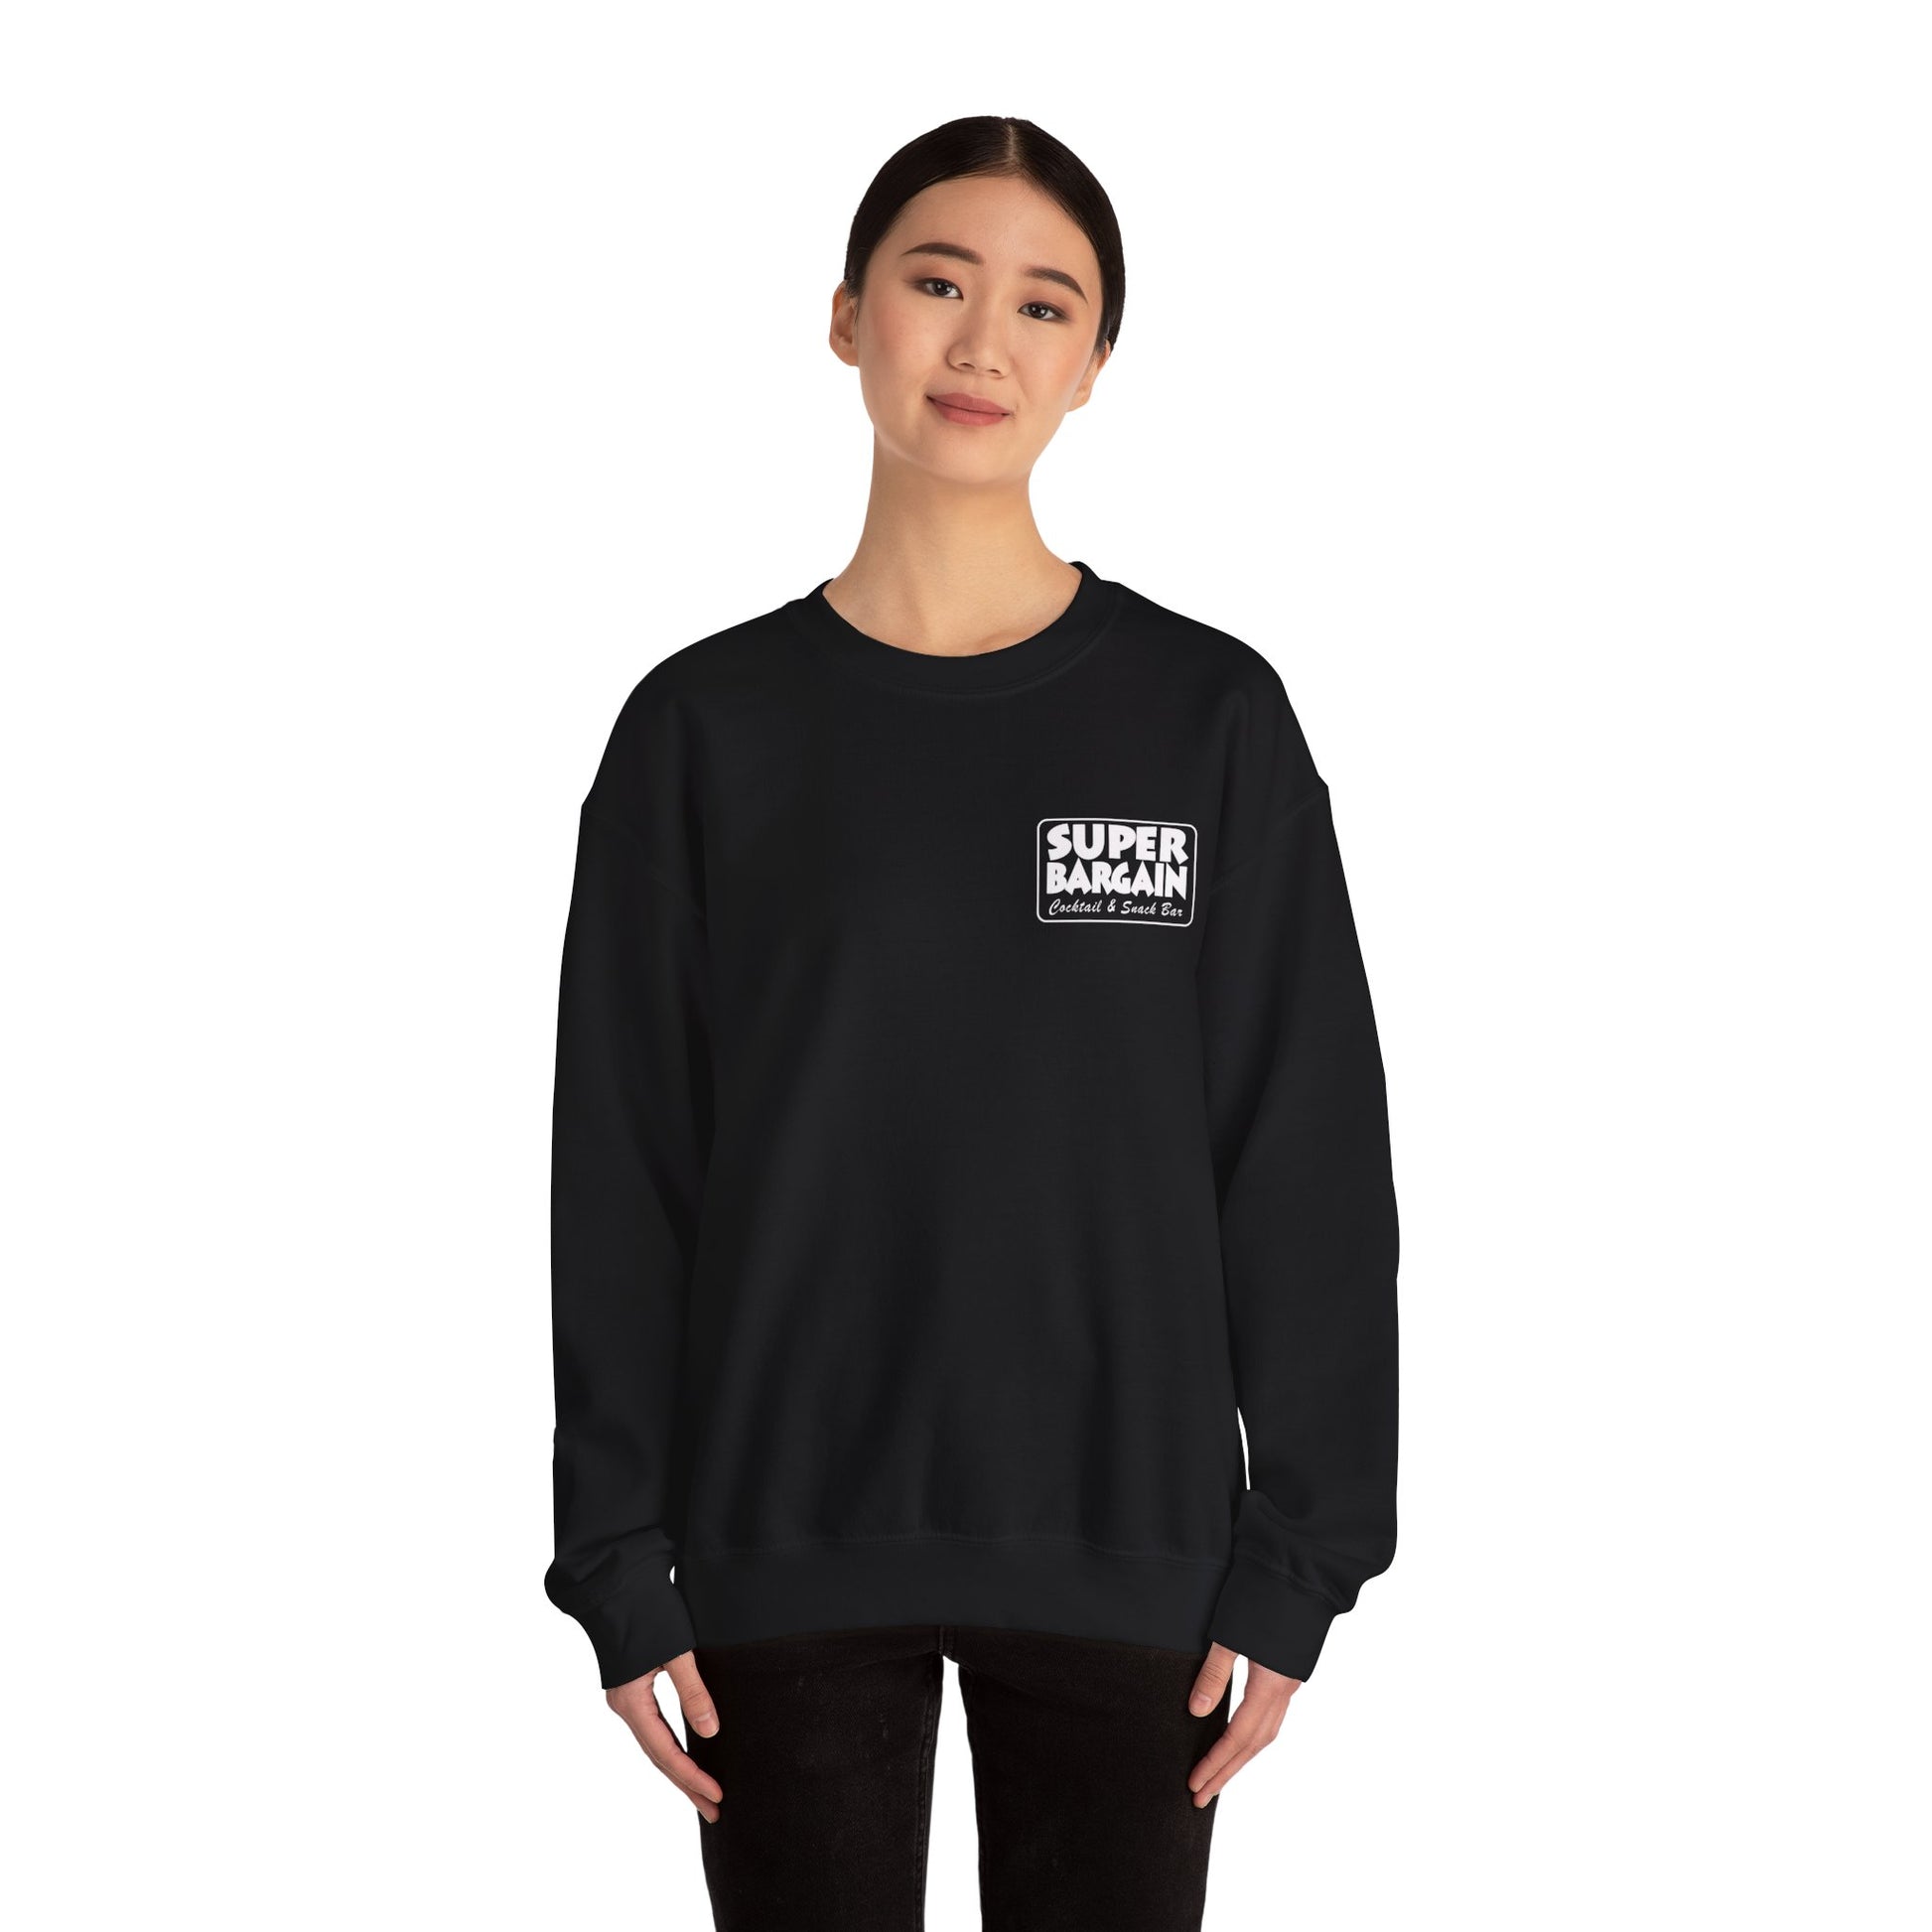 A young Asian woman stands in Cabbagetown, Toronto, wearing a black Printify Unisex Heavy Blend™ Crewneck Monochrome Logo and Cabbagetown sweatshirt with the text "SUPER BARGAIN" printed in white and red on the chest. She has a neutral expression and her hands are by her sides.